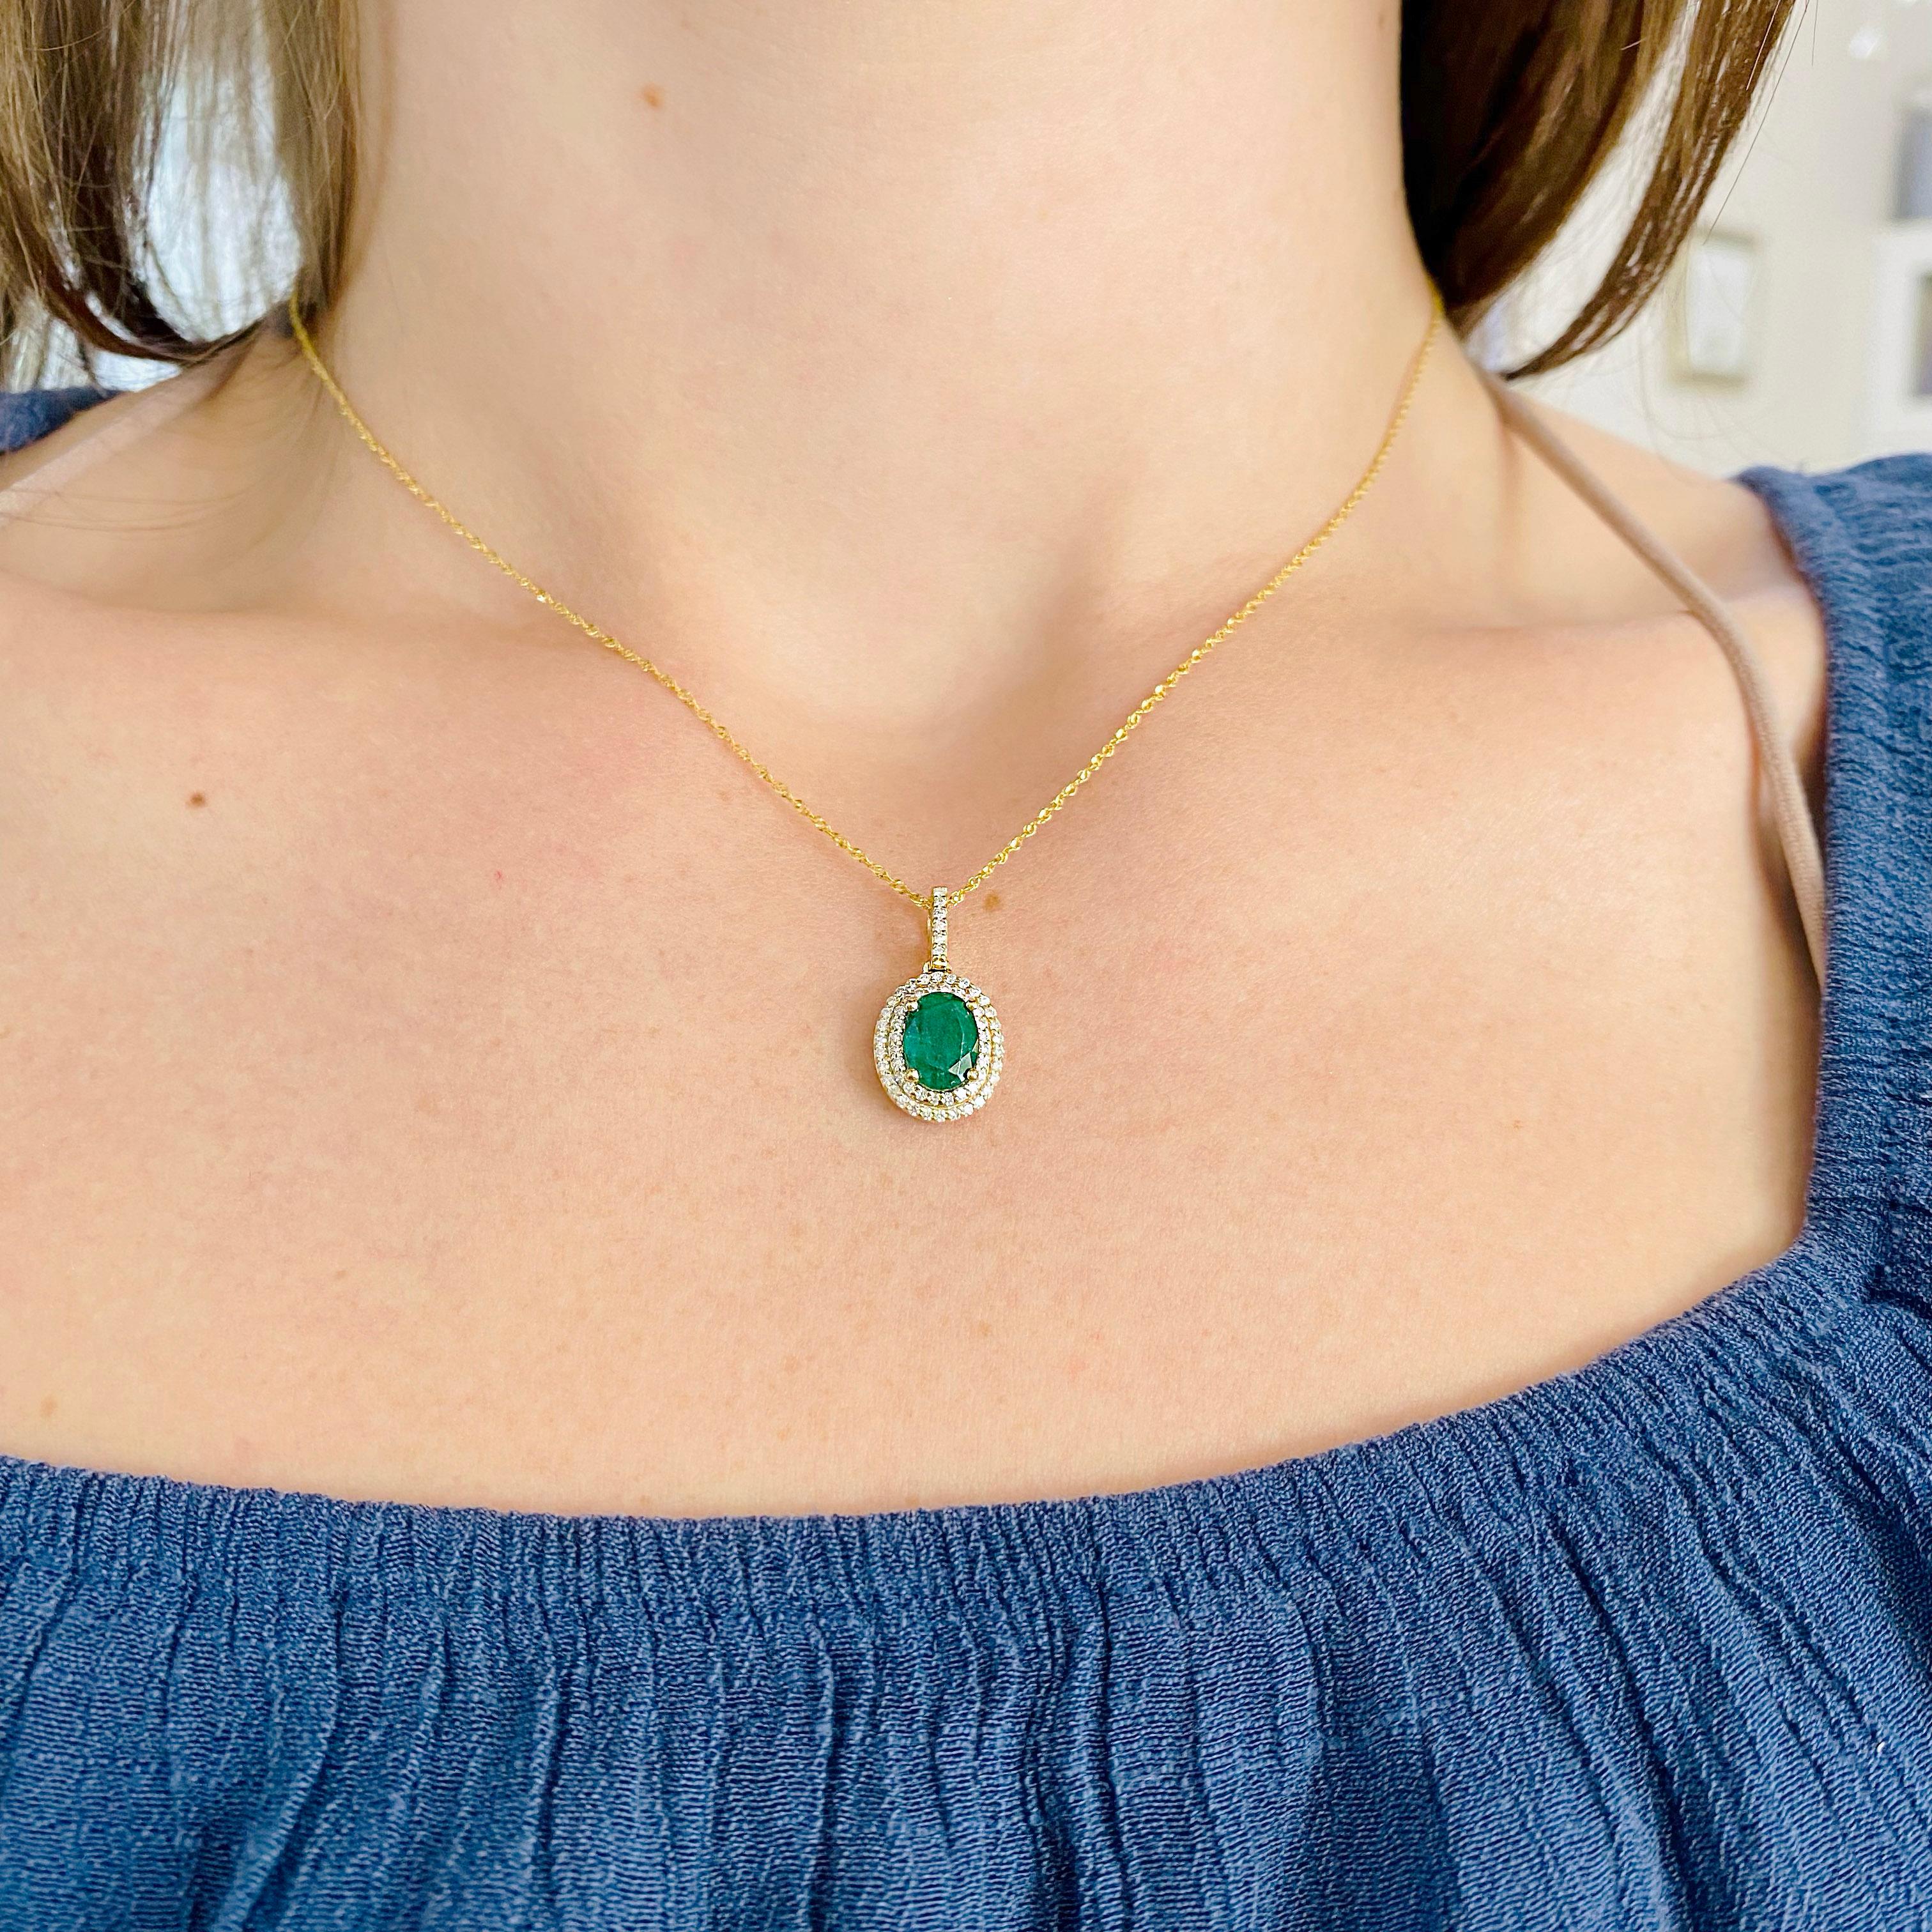 This is a fabulous emerald at a stellar price. She's a gorgeous green pendant with a double halo of diamonds in rich yellow gold. The cable link chain is a slim and durable design that goes with a variety of other necklaces and dressing up or down